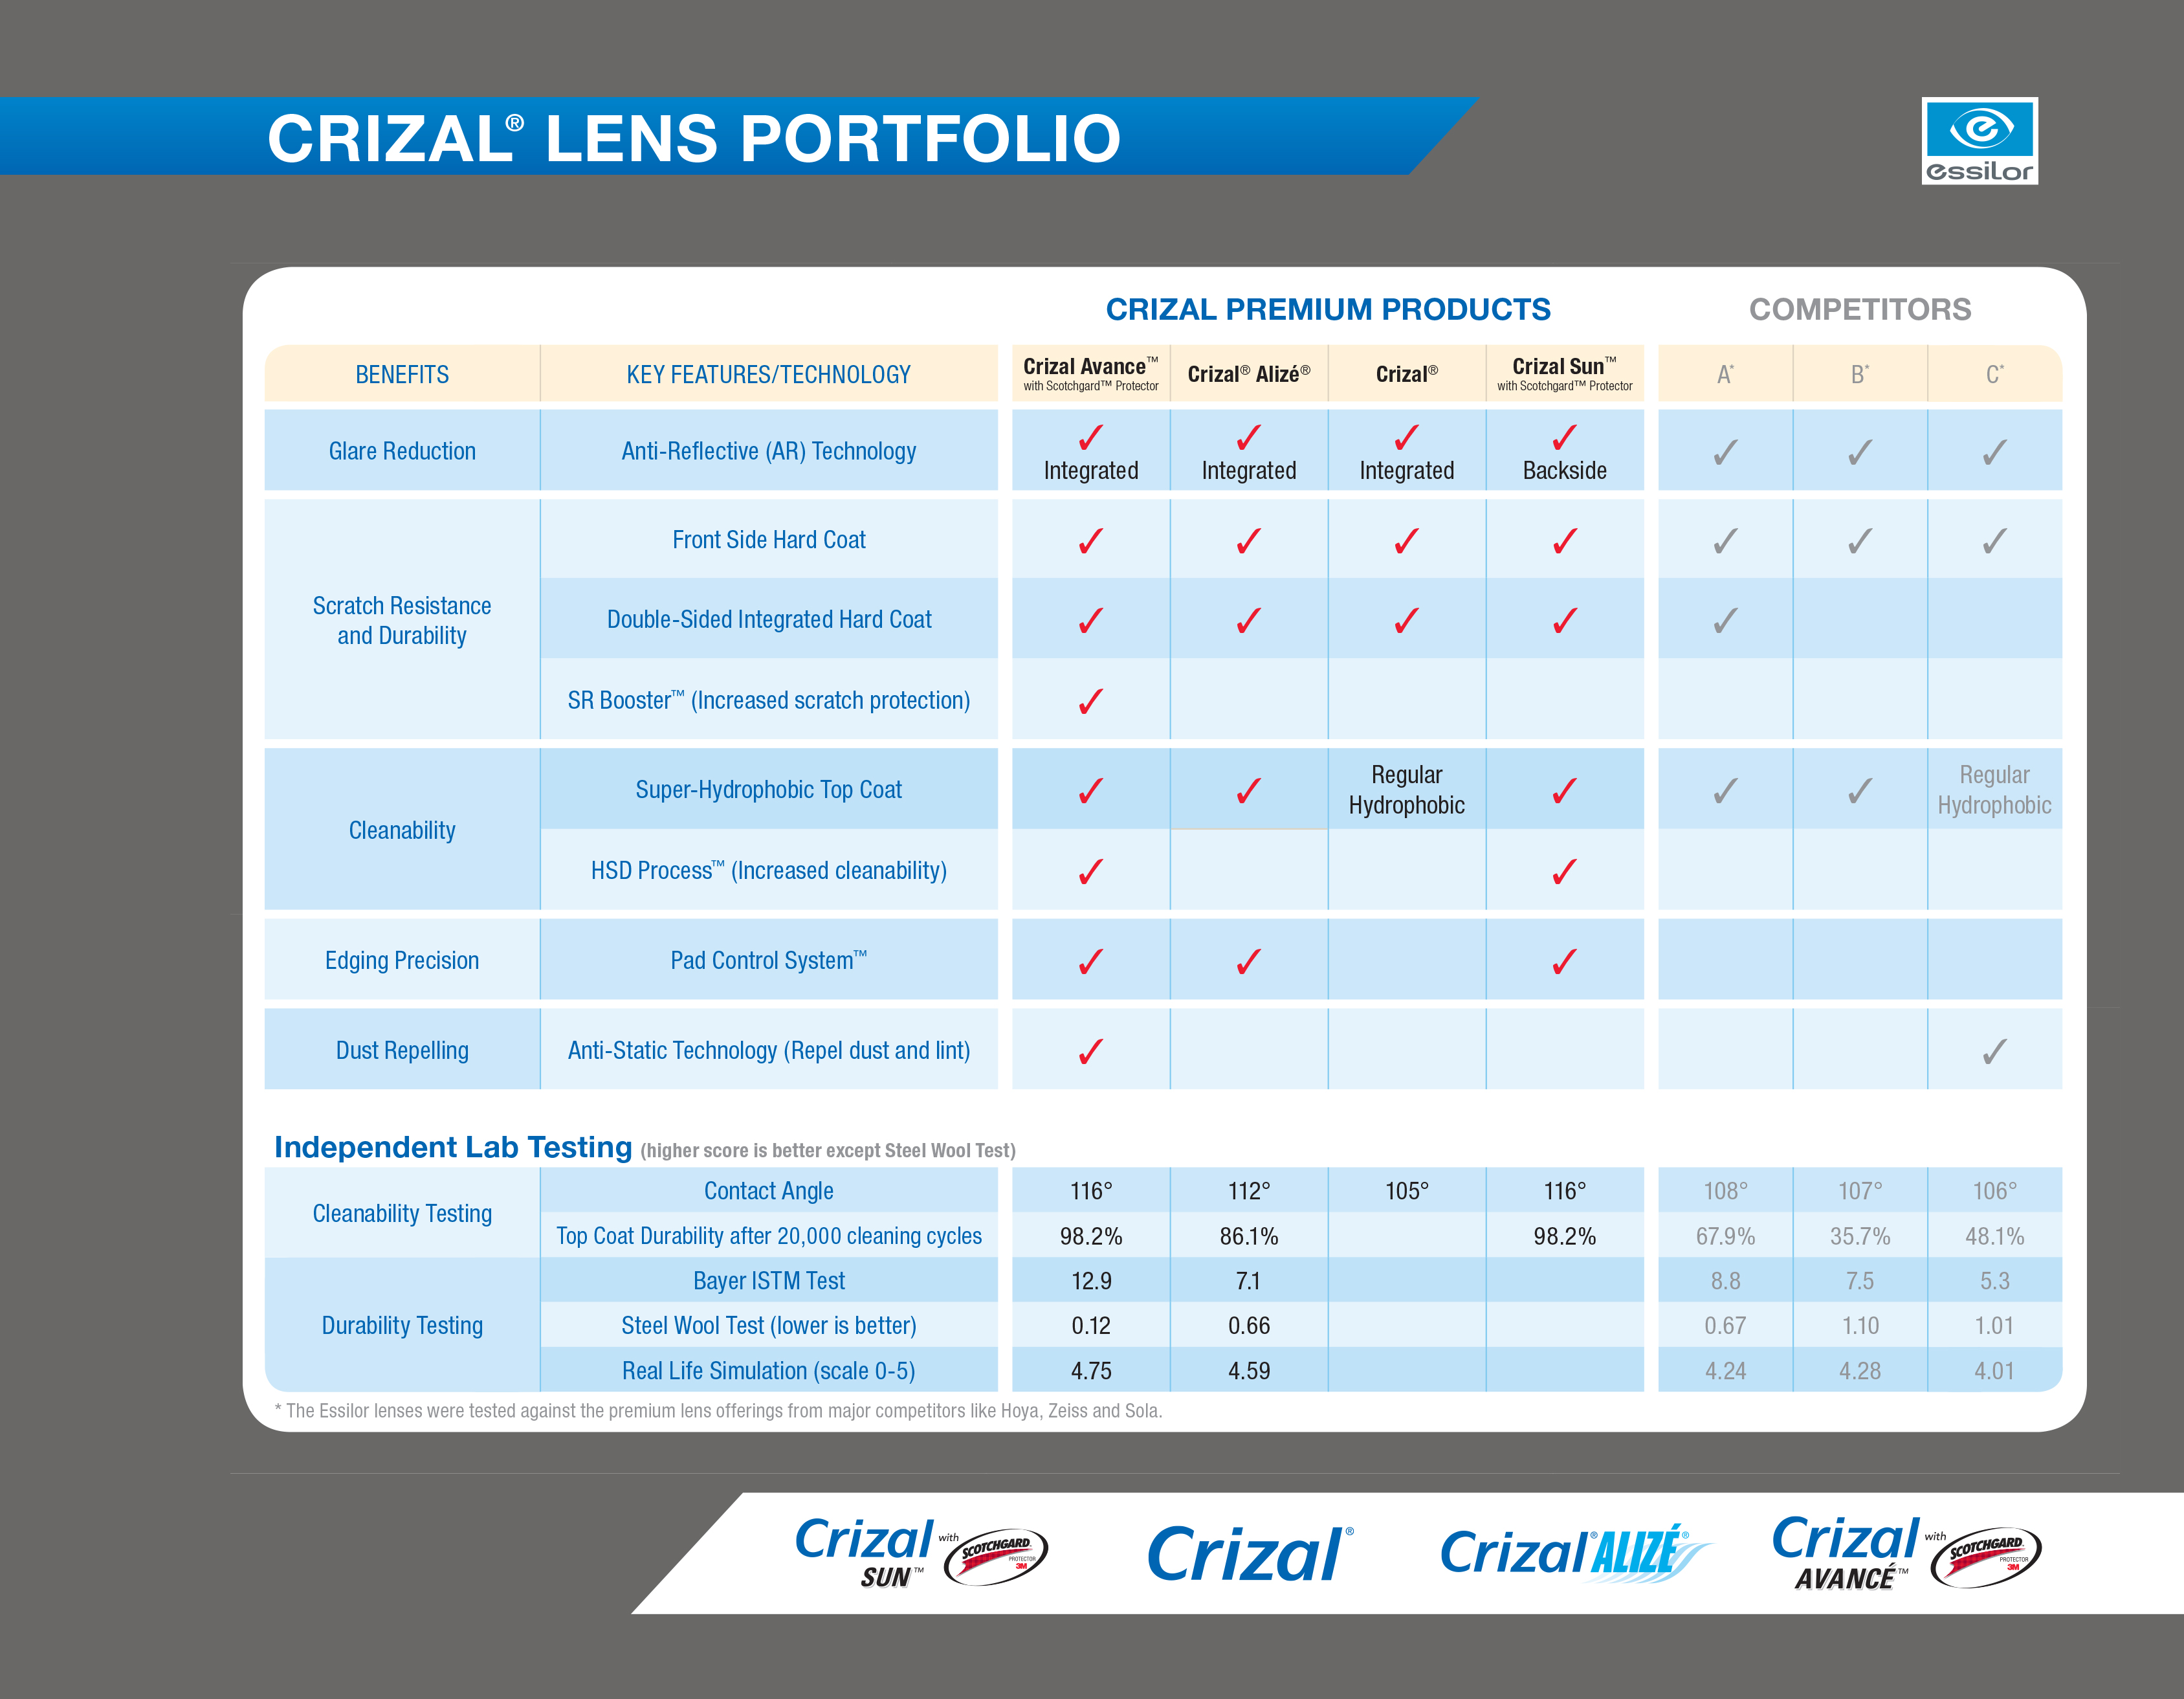 Essilor Lenses Price List - How do you Price a Switches?